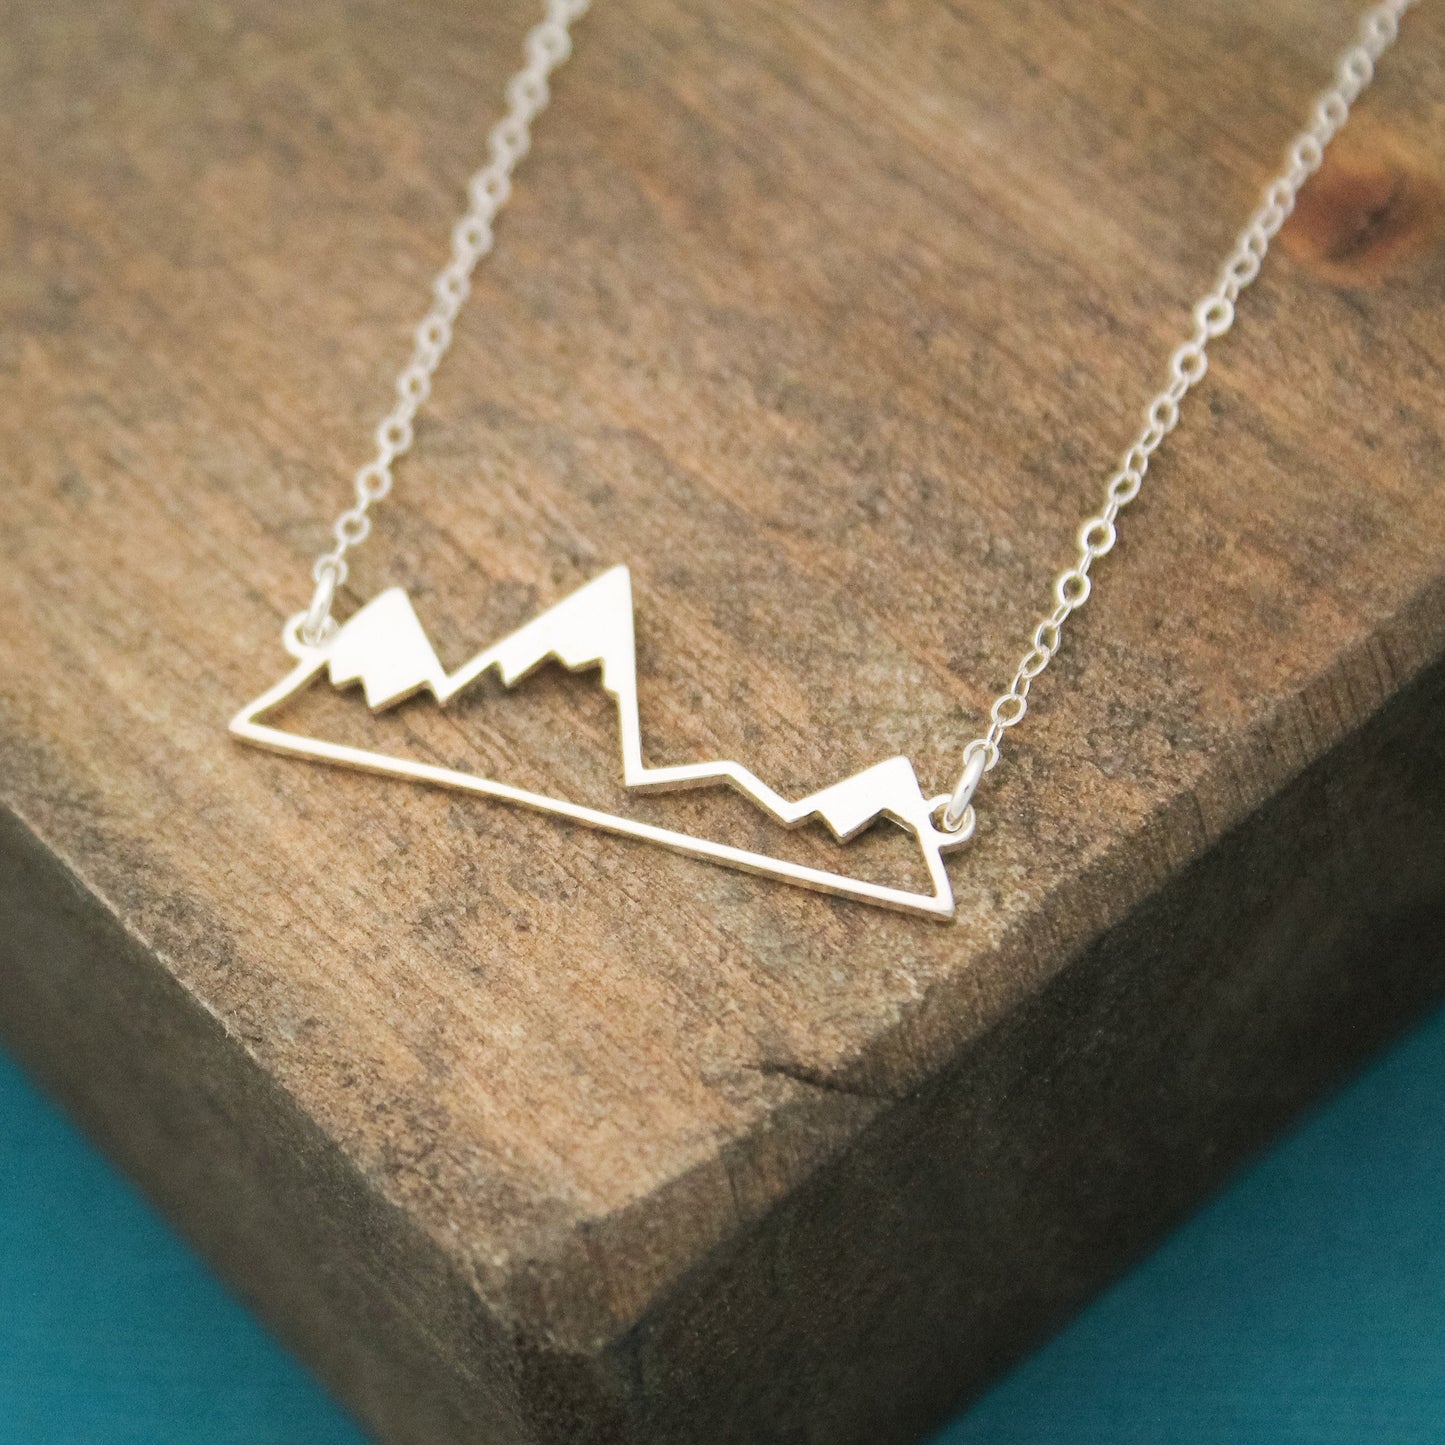 Mountain Necklace Sterling Silver, Horizontal Bar Necklace, Mountain Range Jewelry, Adventure Jewelry, Mountain Jewelry, GPNW Necklace